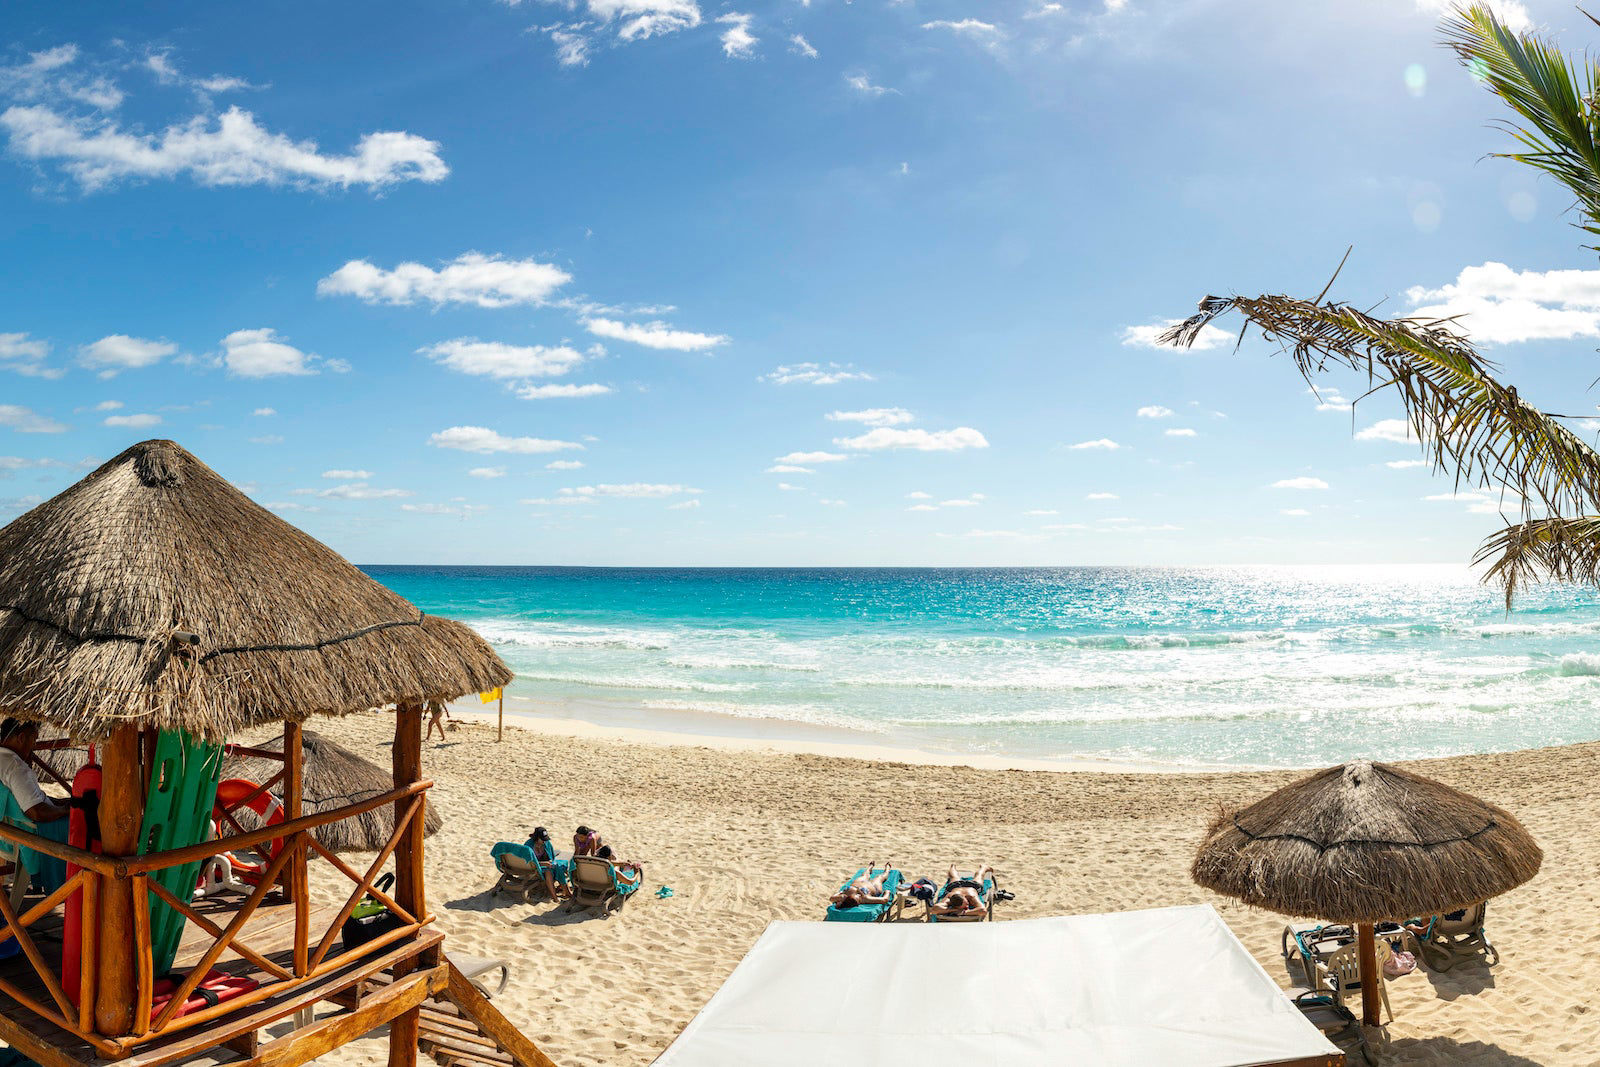 Score Delta flights to Cancun for as low as $202